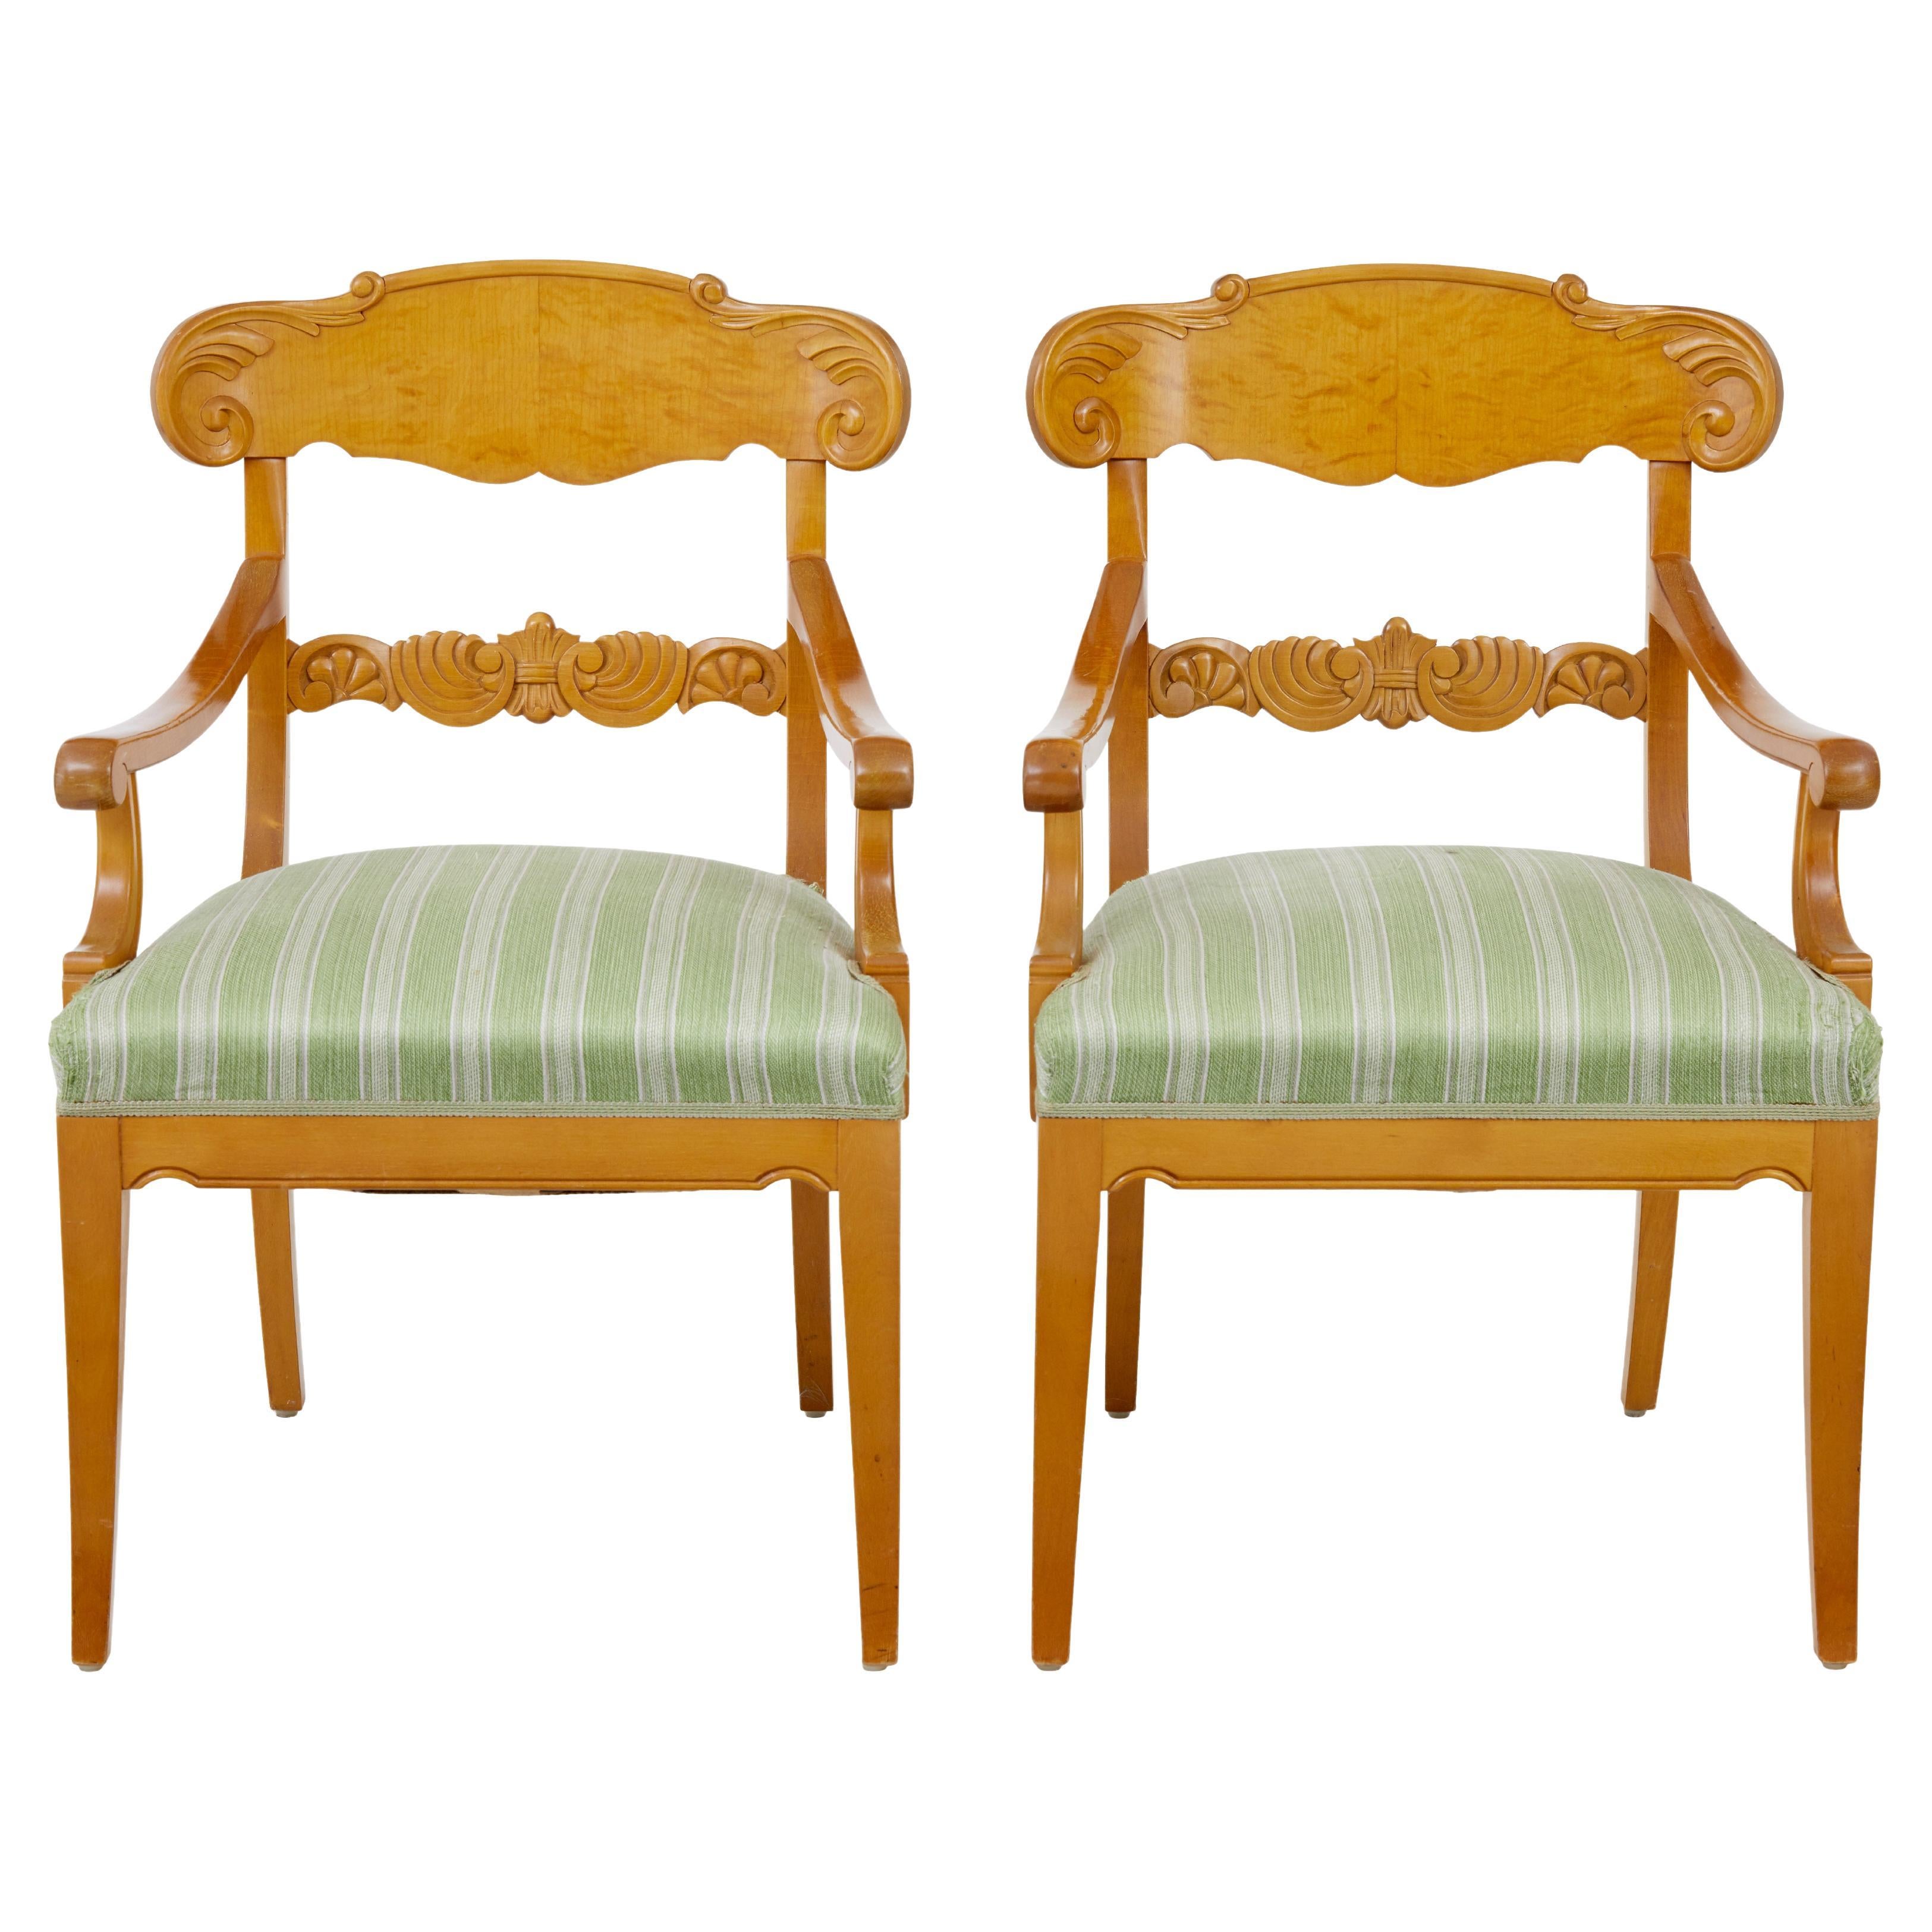 Pair of early 20th Swedish carved birch armchairs